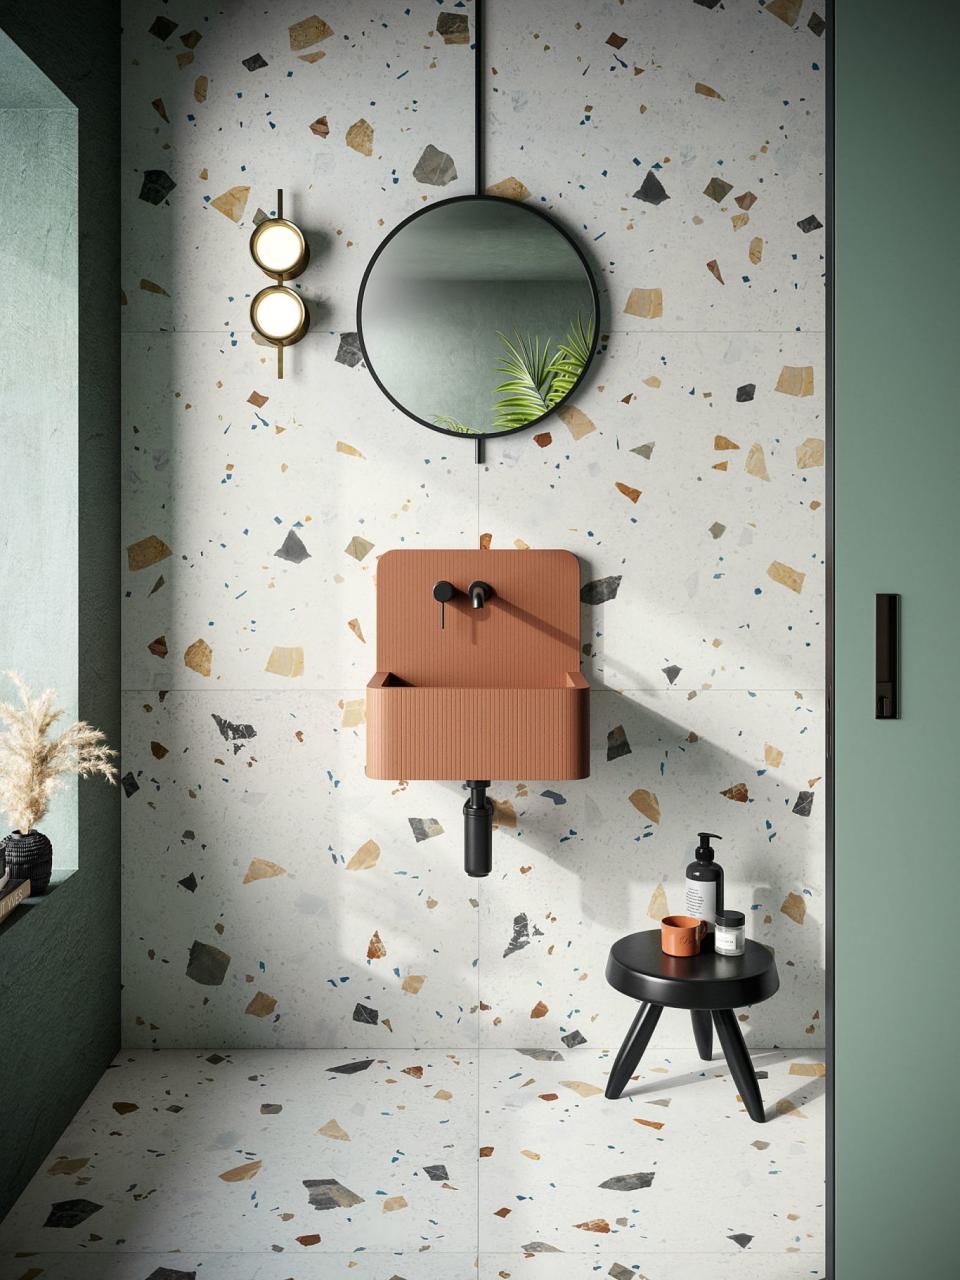 Introduce terrazzo for color and texture